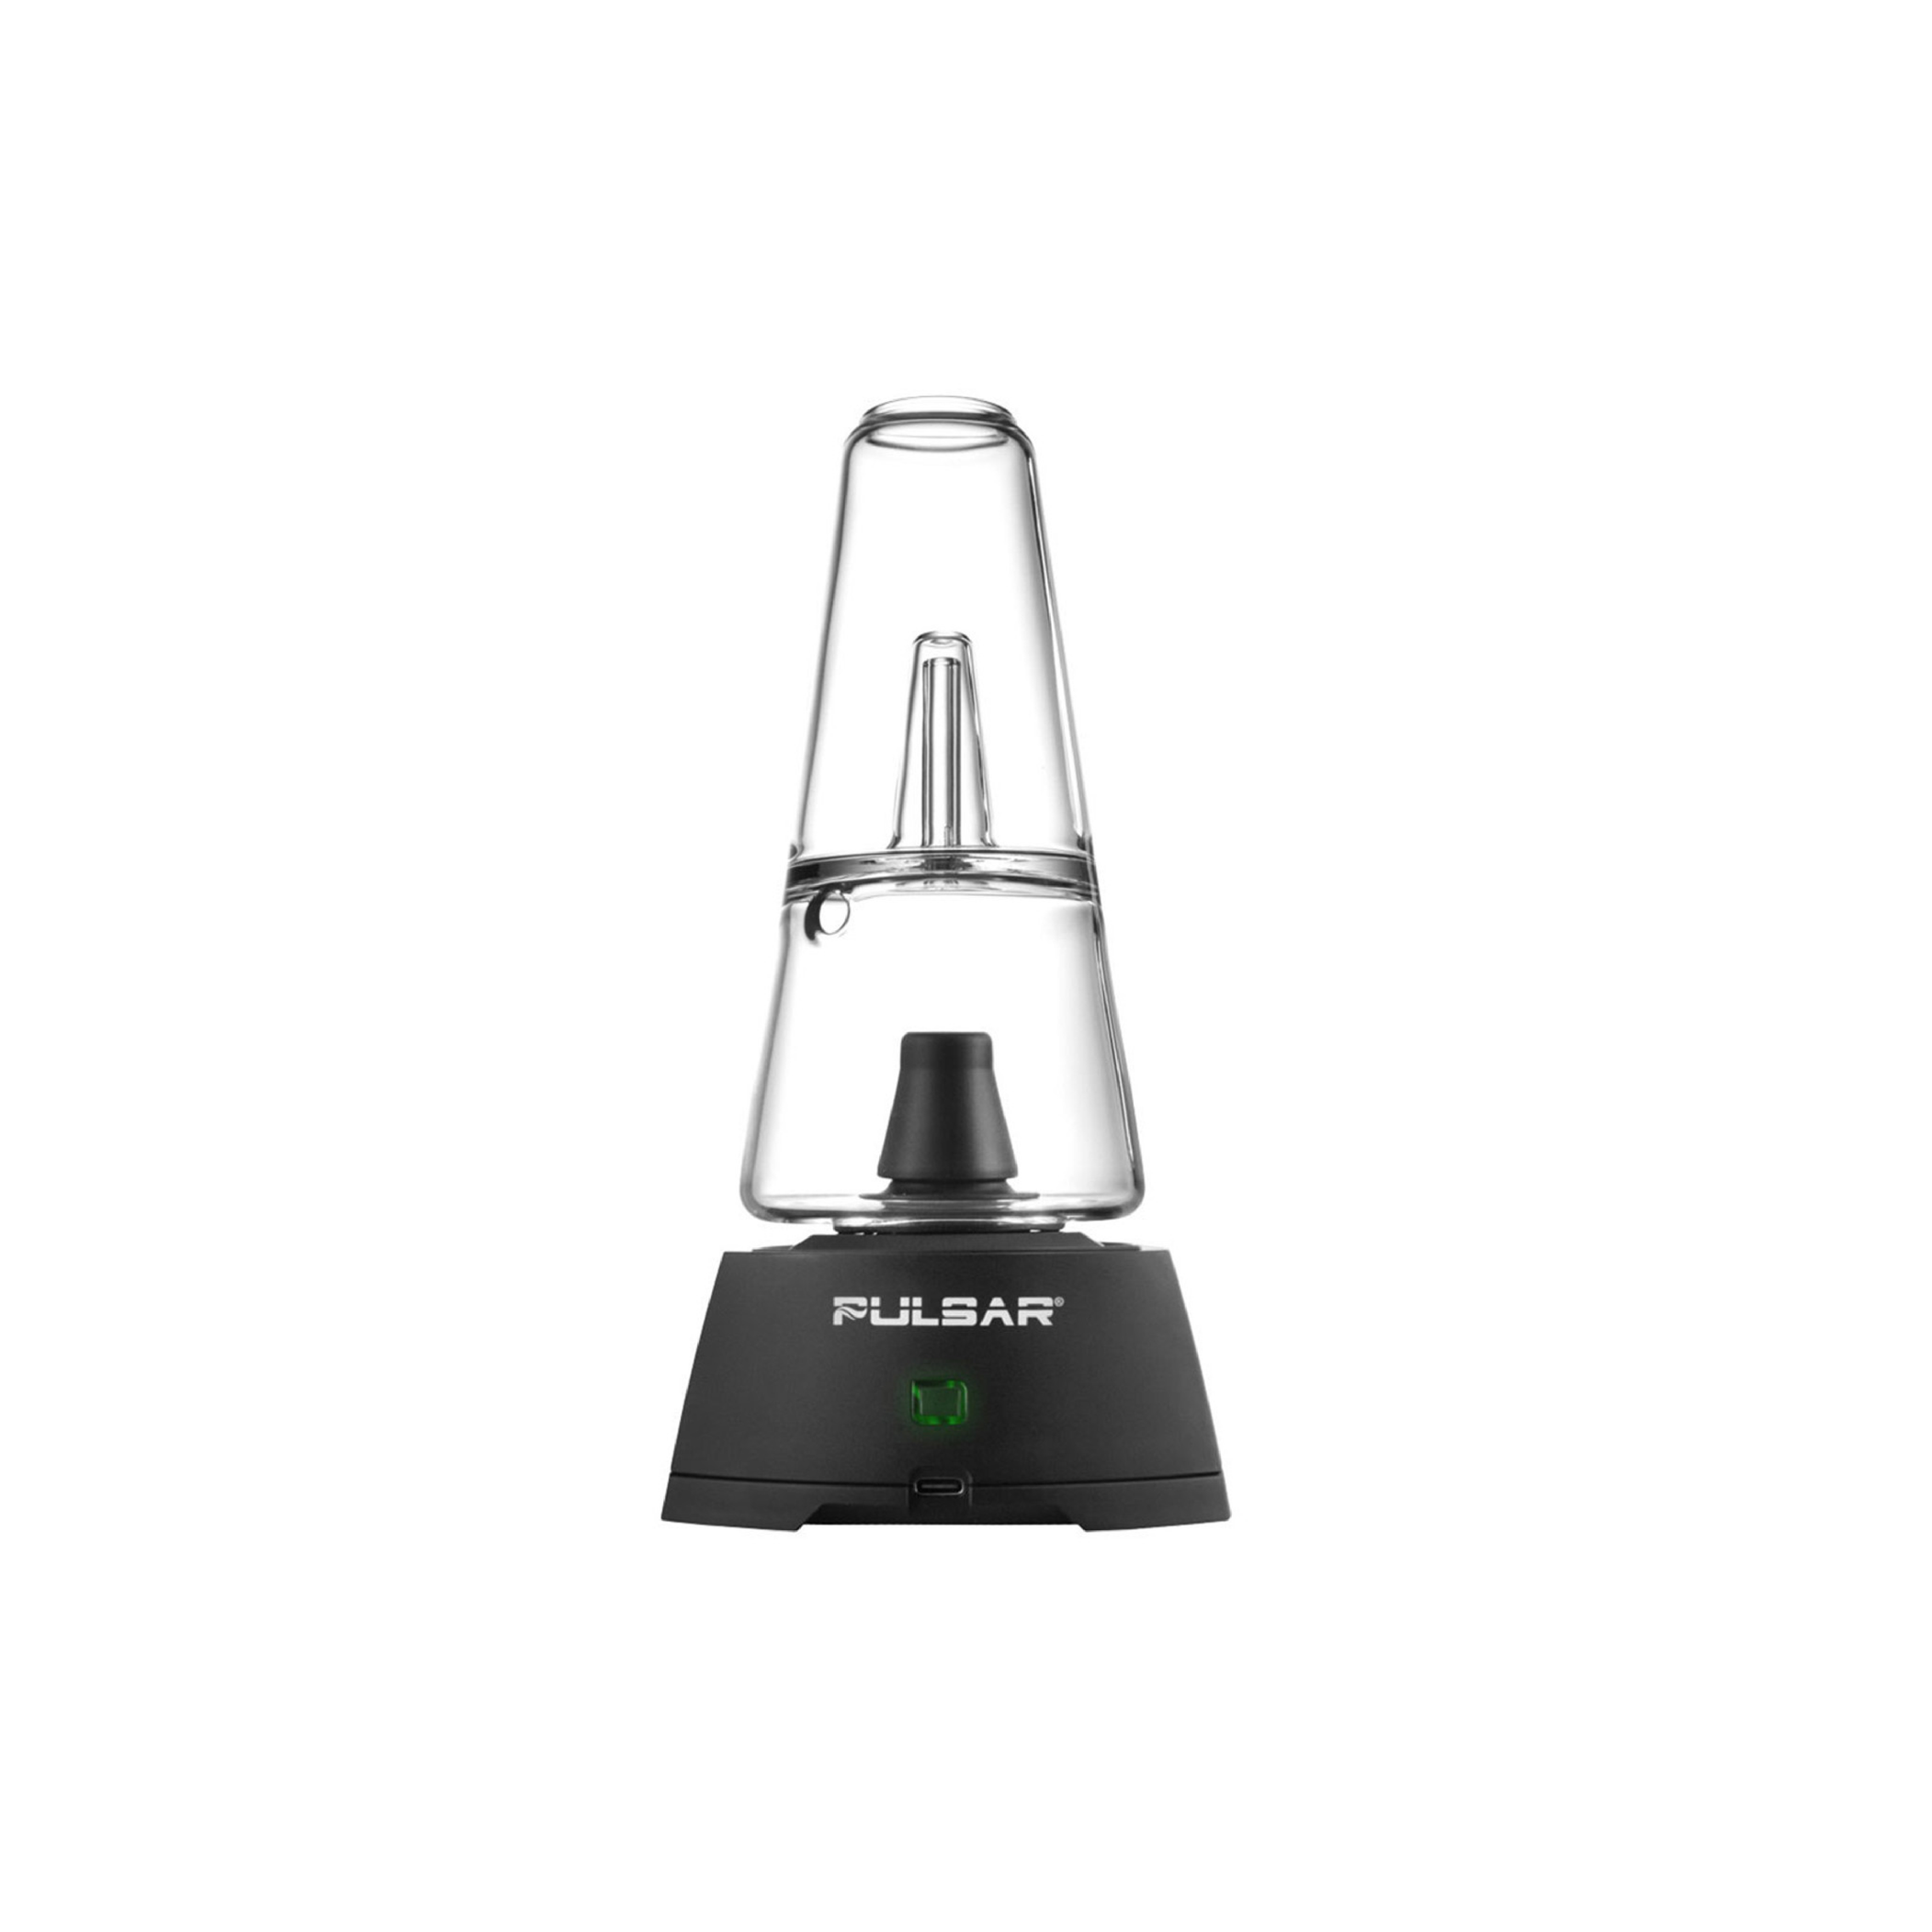 Sipper Dual Use Concentrate or 510 Cartridge Vaporizer